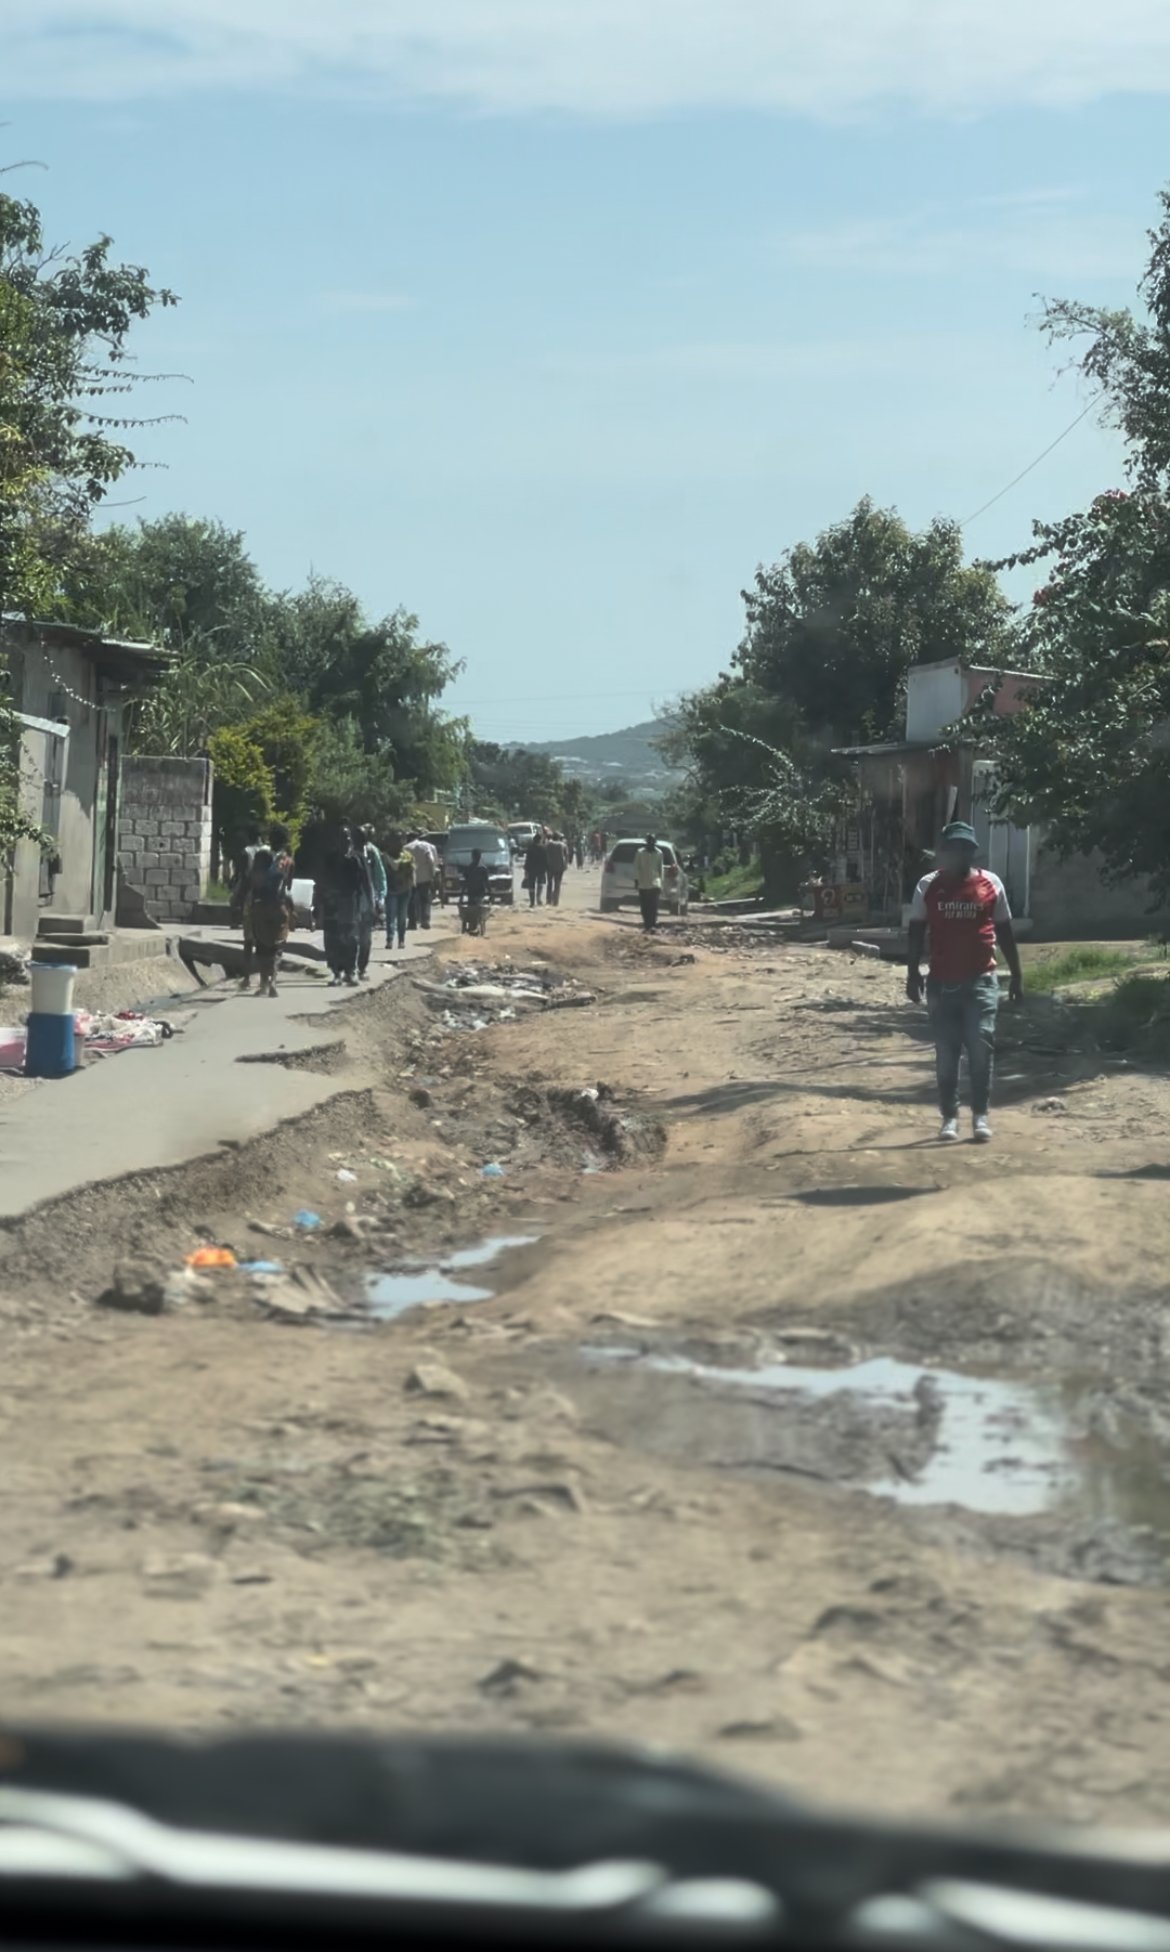 Our "road" to school - Pray with us that the city council would help these people with a road!